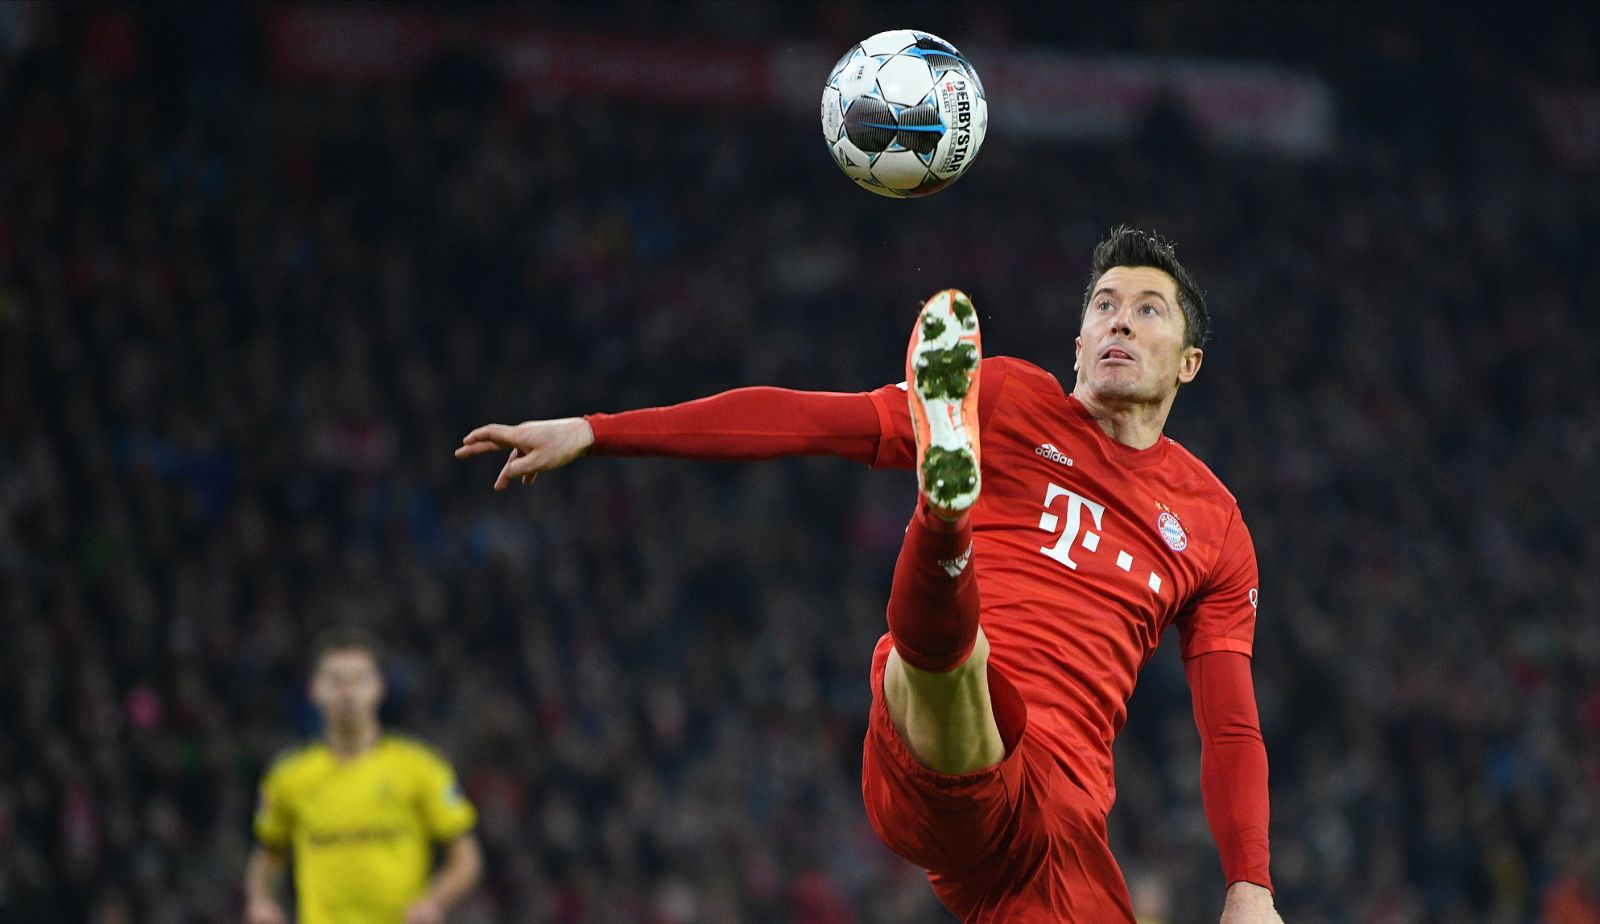 epa08890528 (FILE) - Bayern Munich's Robert Lewandowski in action during the German Bundesliga soccer match between Bayern Munich and Borussia Dortmund in Munich, Germany, 09 November 2019 (re-issued on 17 December 2020). Polish striker Robert Lewandowski has been named The Best FIFA Men's Player during the virtual Best FIFA Football Awards 2020 on 17 December 2020.  EPA/PHILIPP GUELLAND CONDITIONS - ATTENTION: The DFL regulations prohibit any use of photographs as image sequences and/or quasi-video.